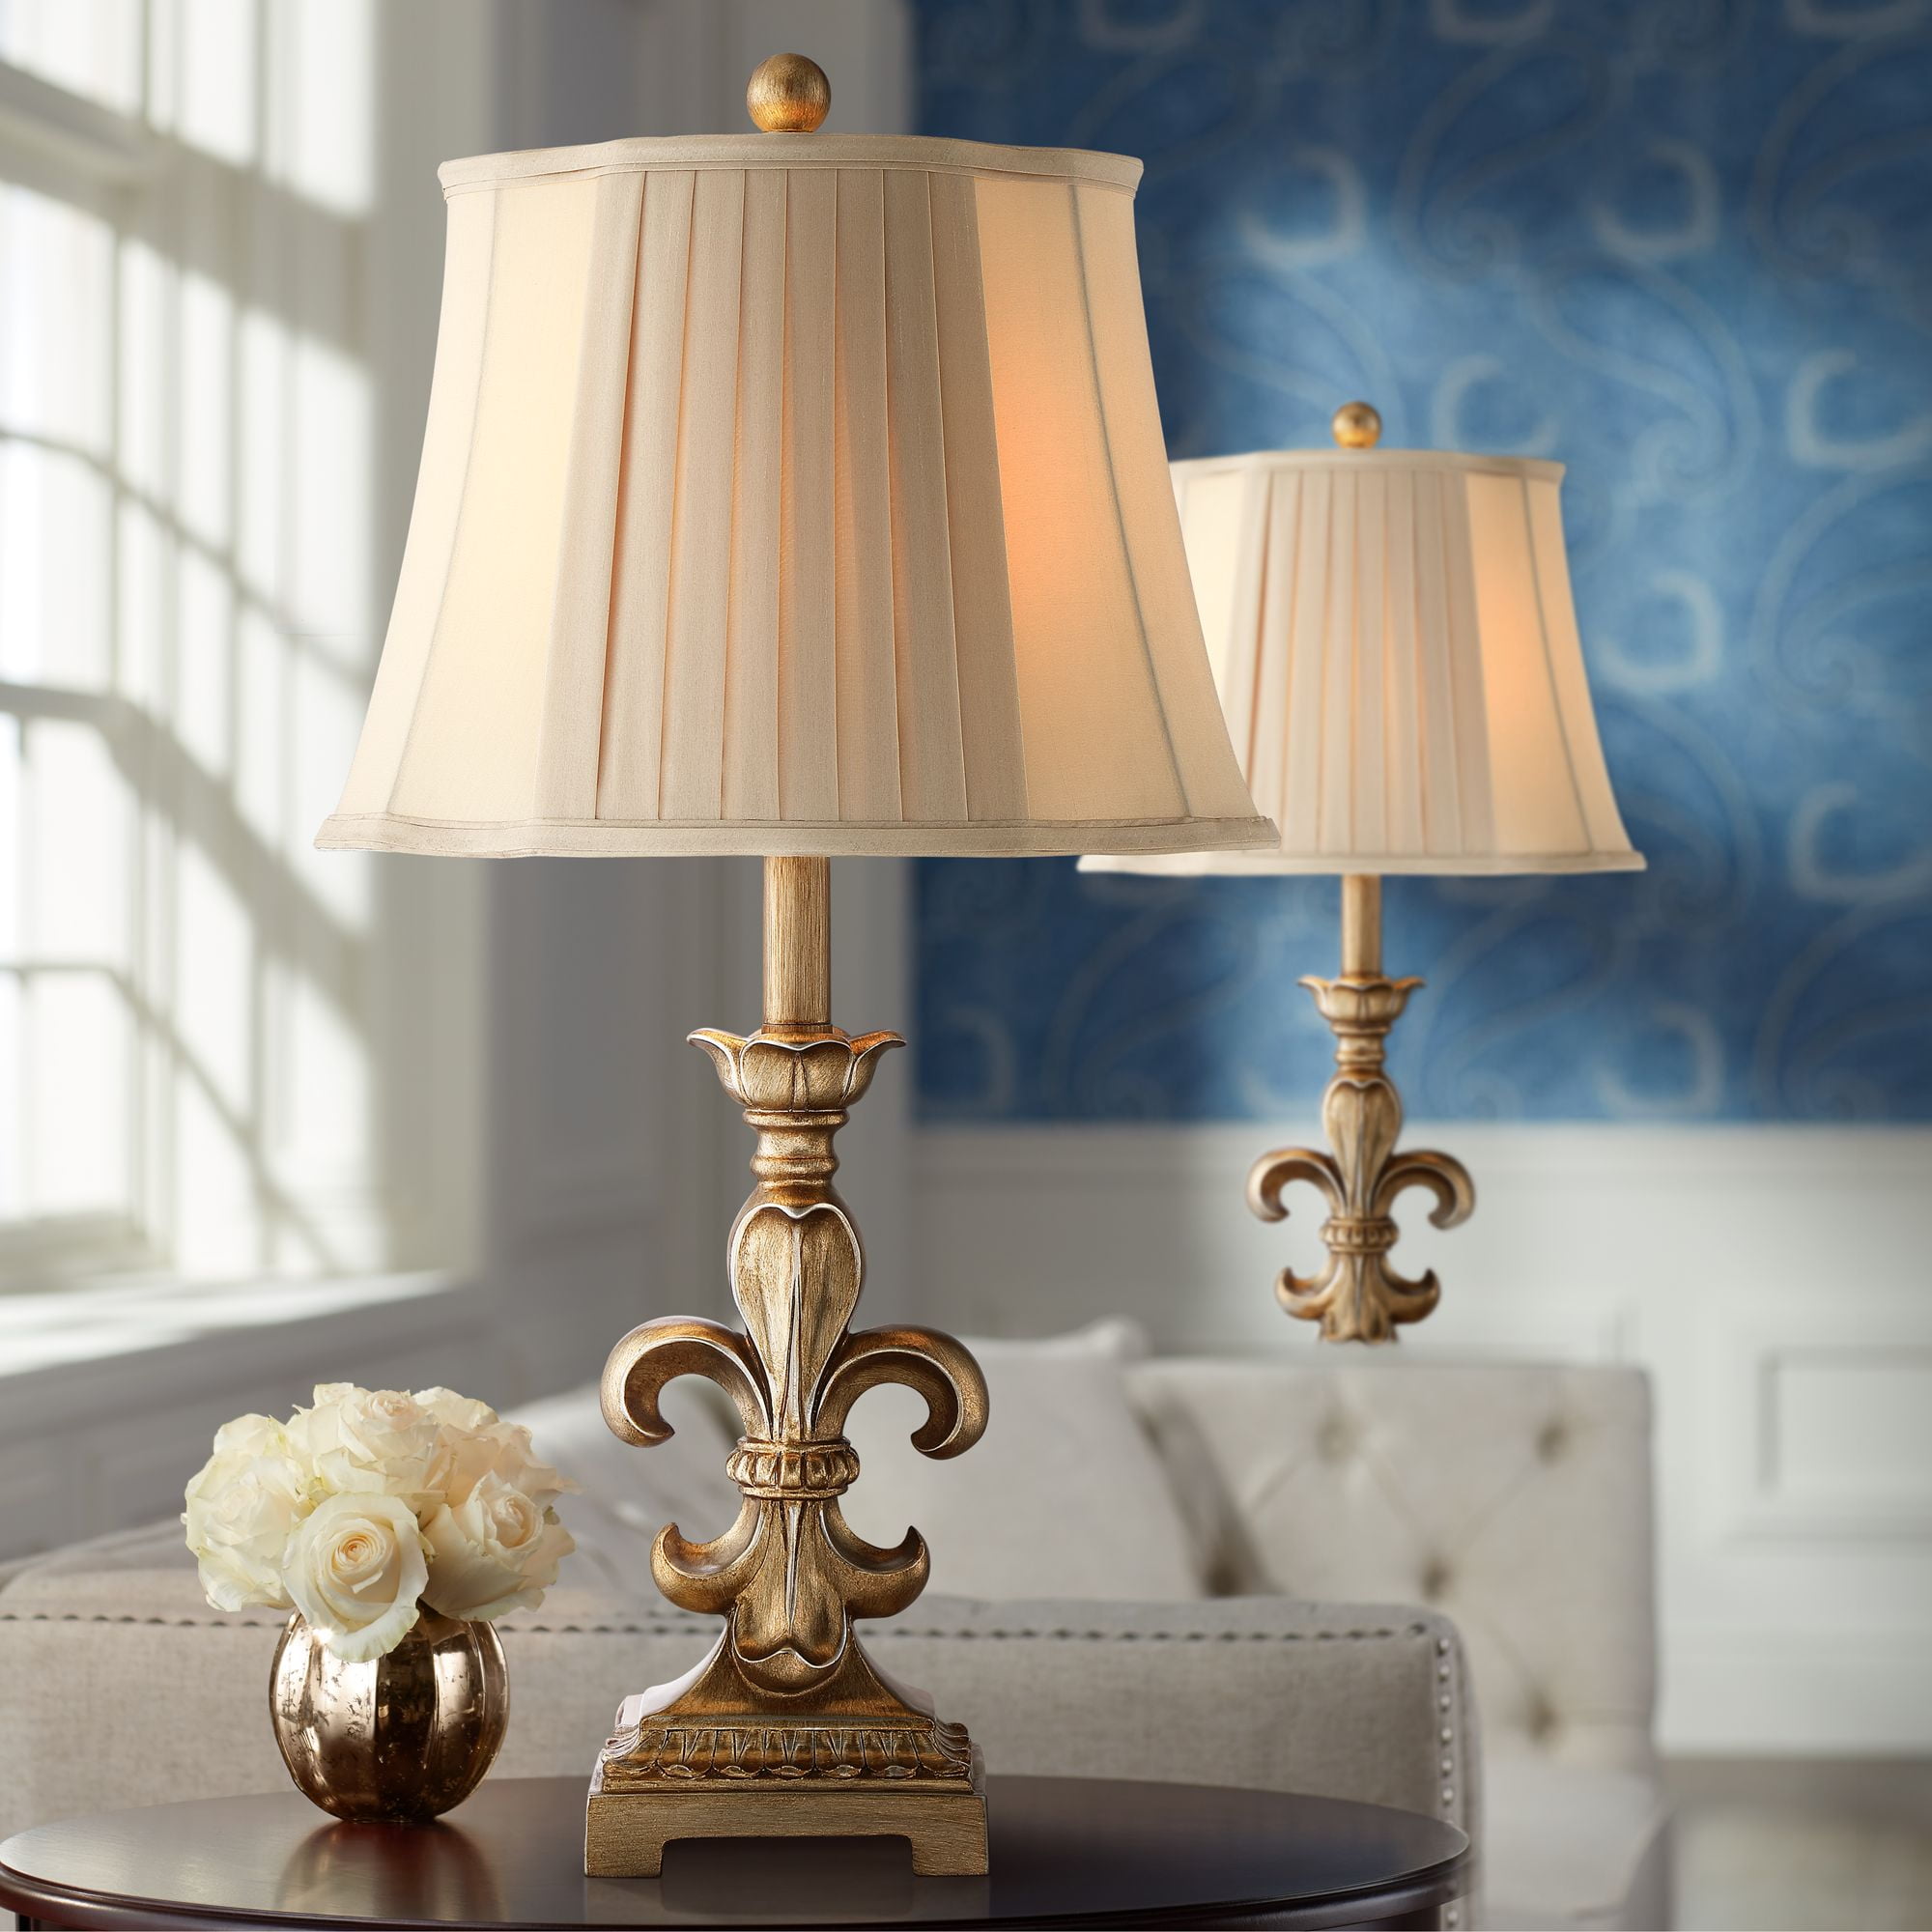 Regency Hill Traditional Table Lamps 25, Antique Gold Table Lamp Shade